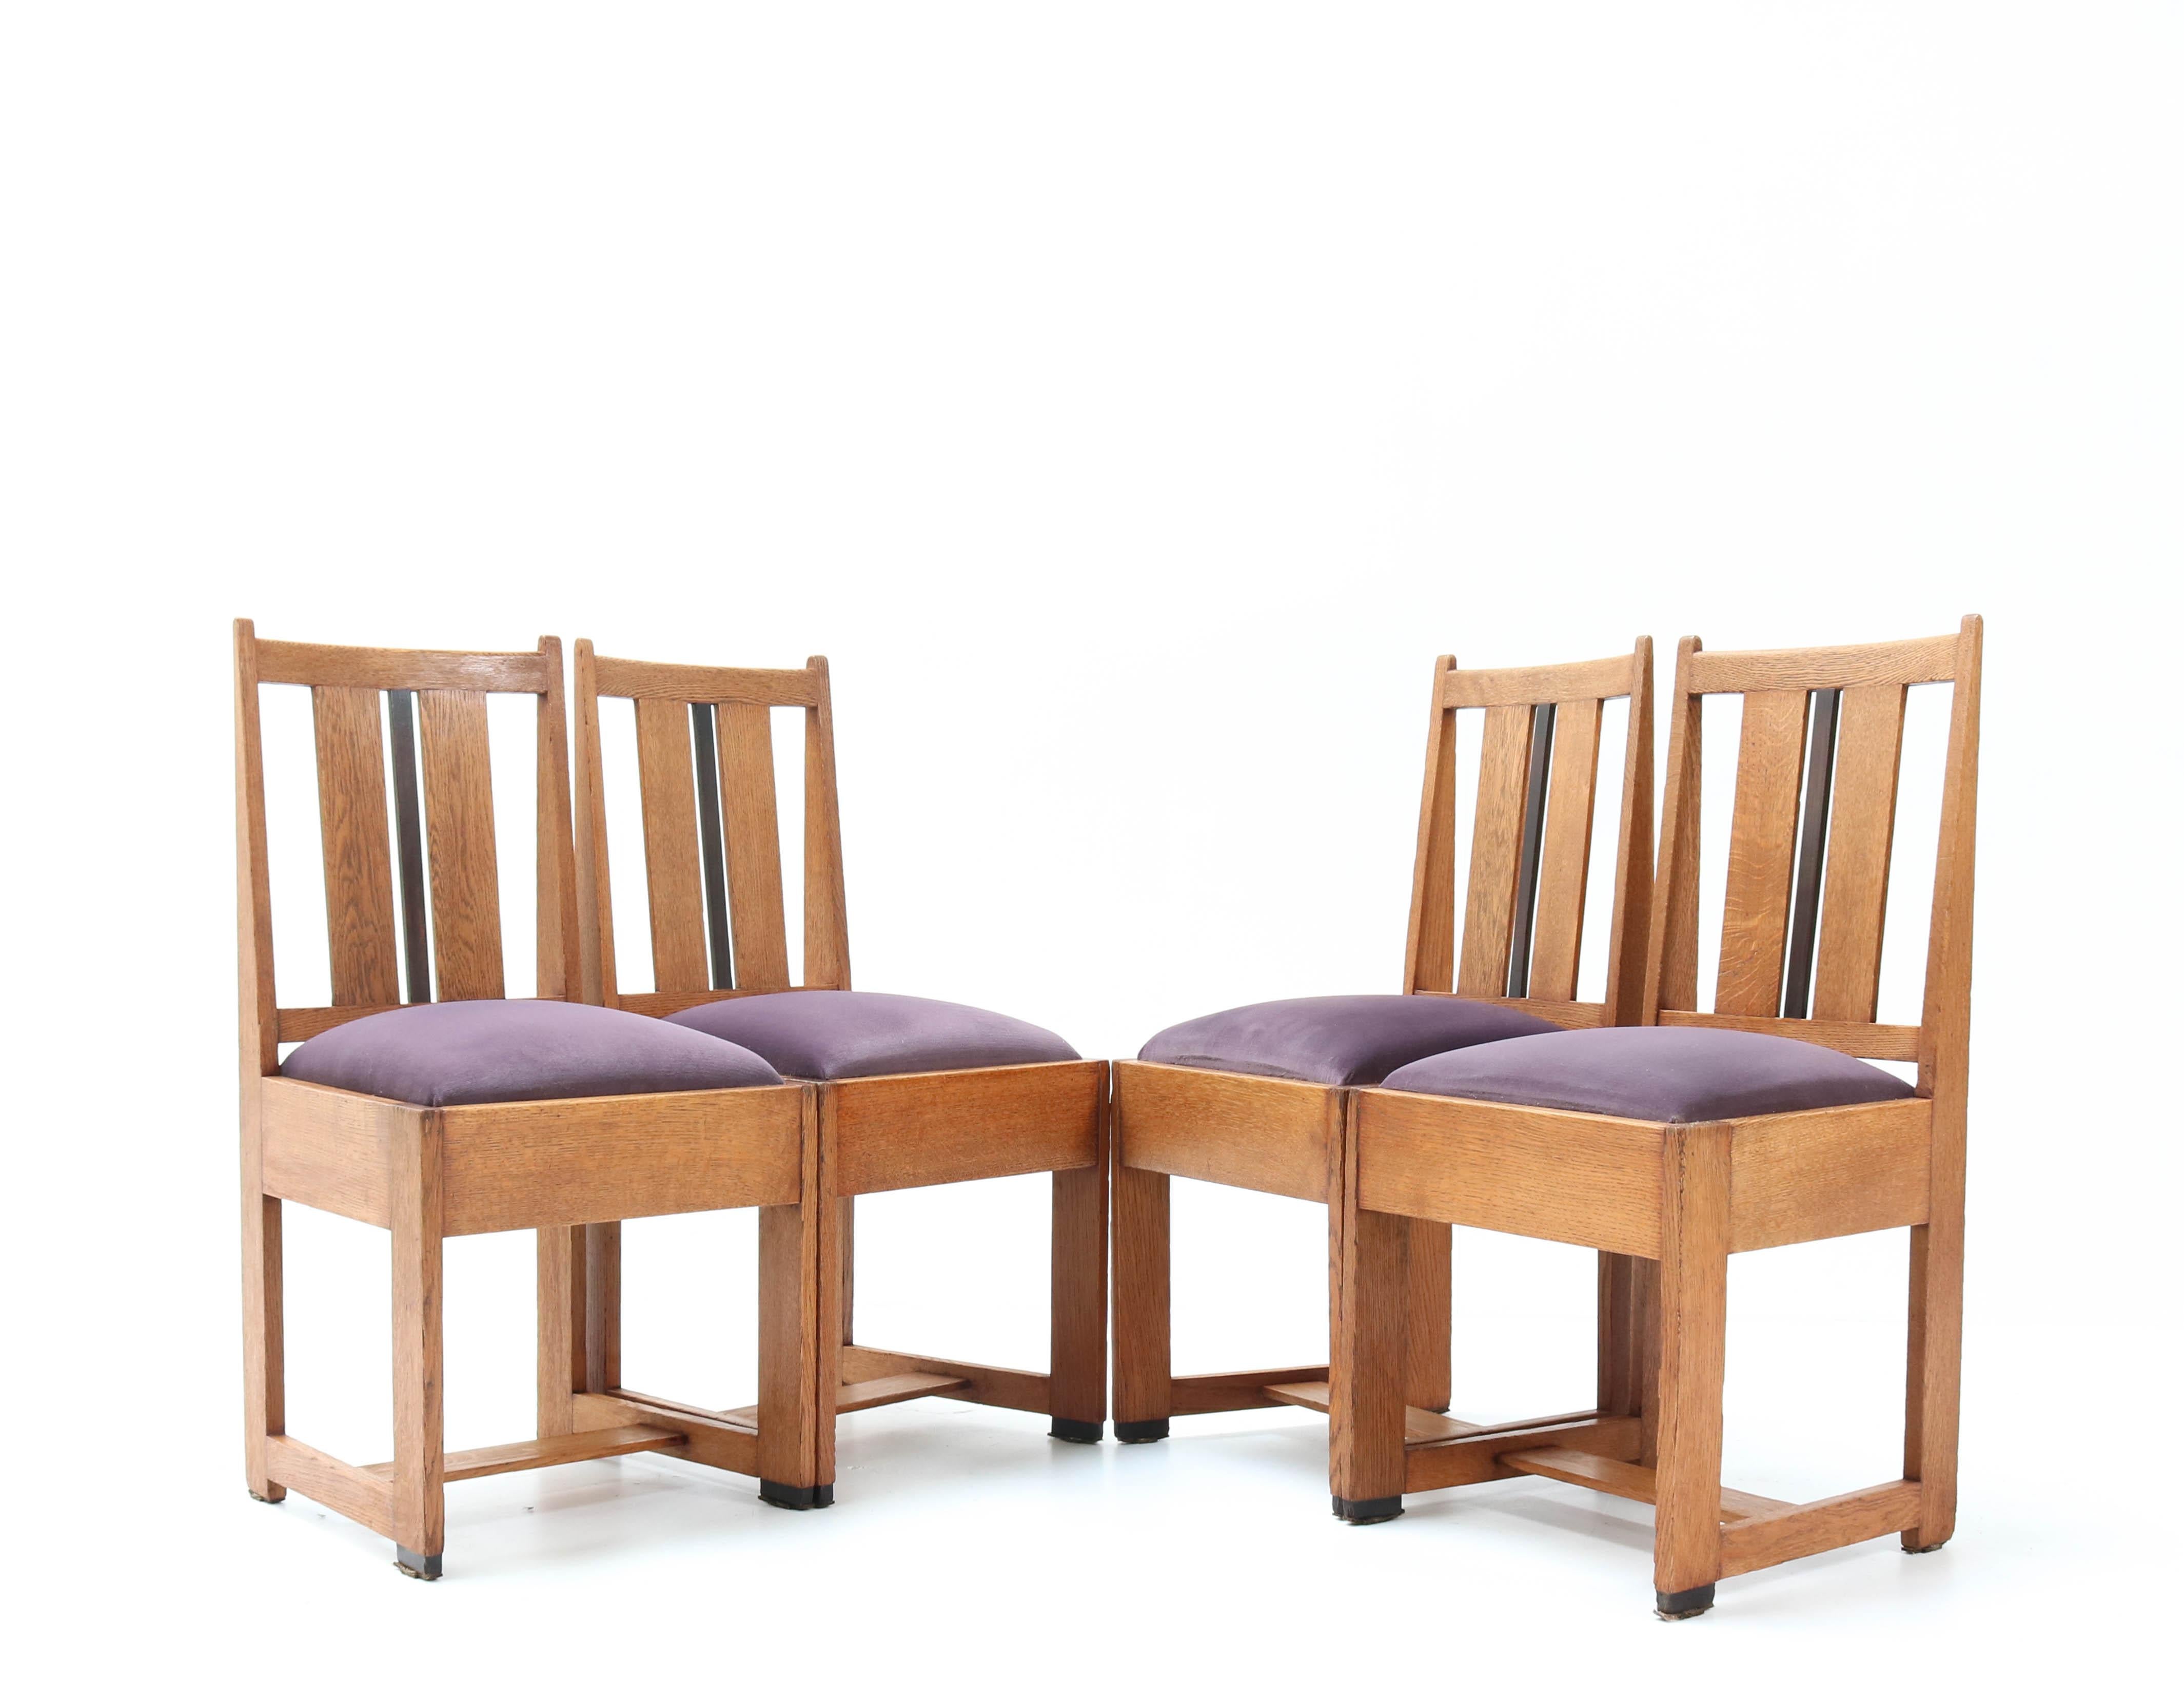 Early 20th Century Six Oak Art Deco Haagse School Dining Room Chairs, 1920s